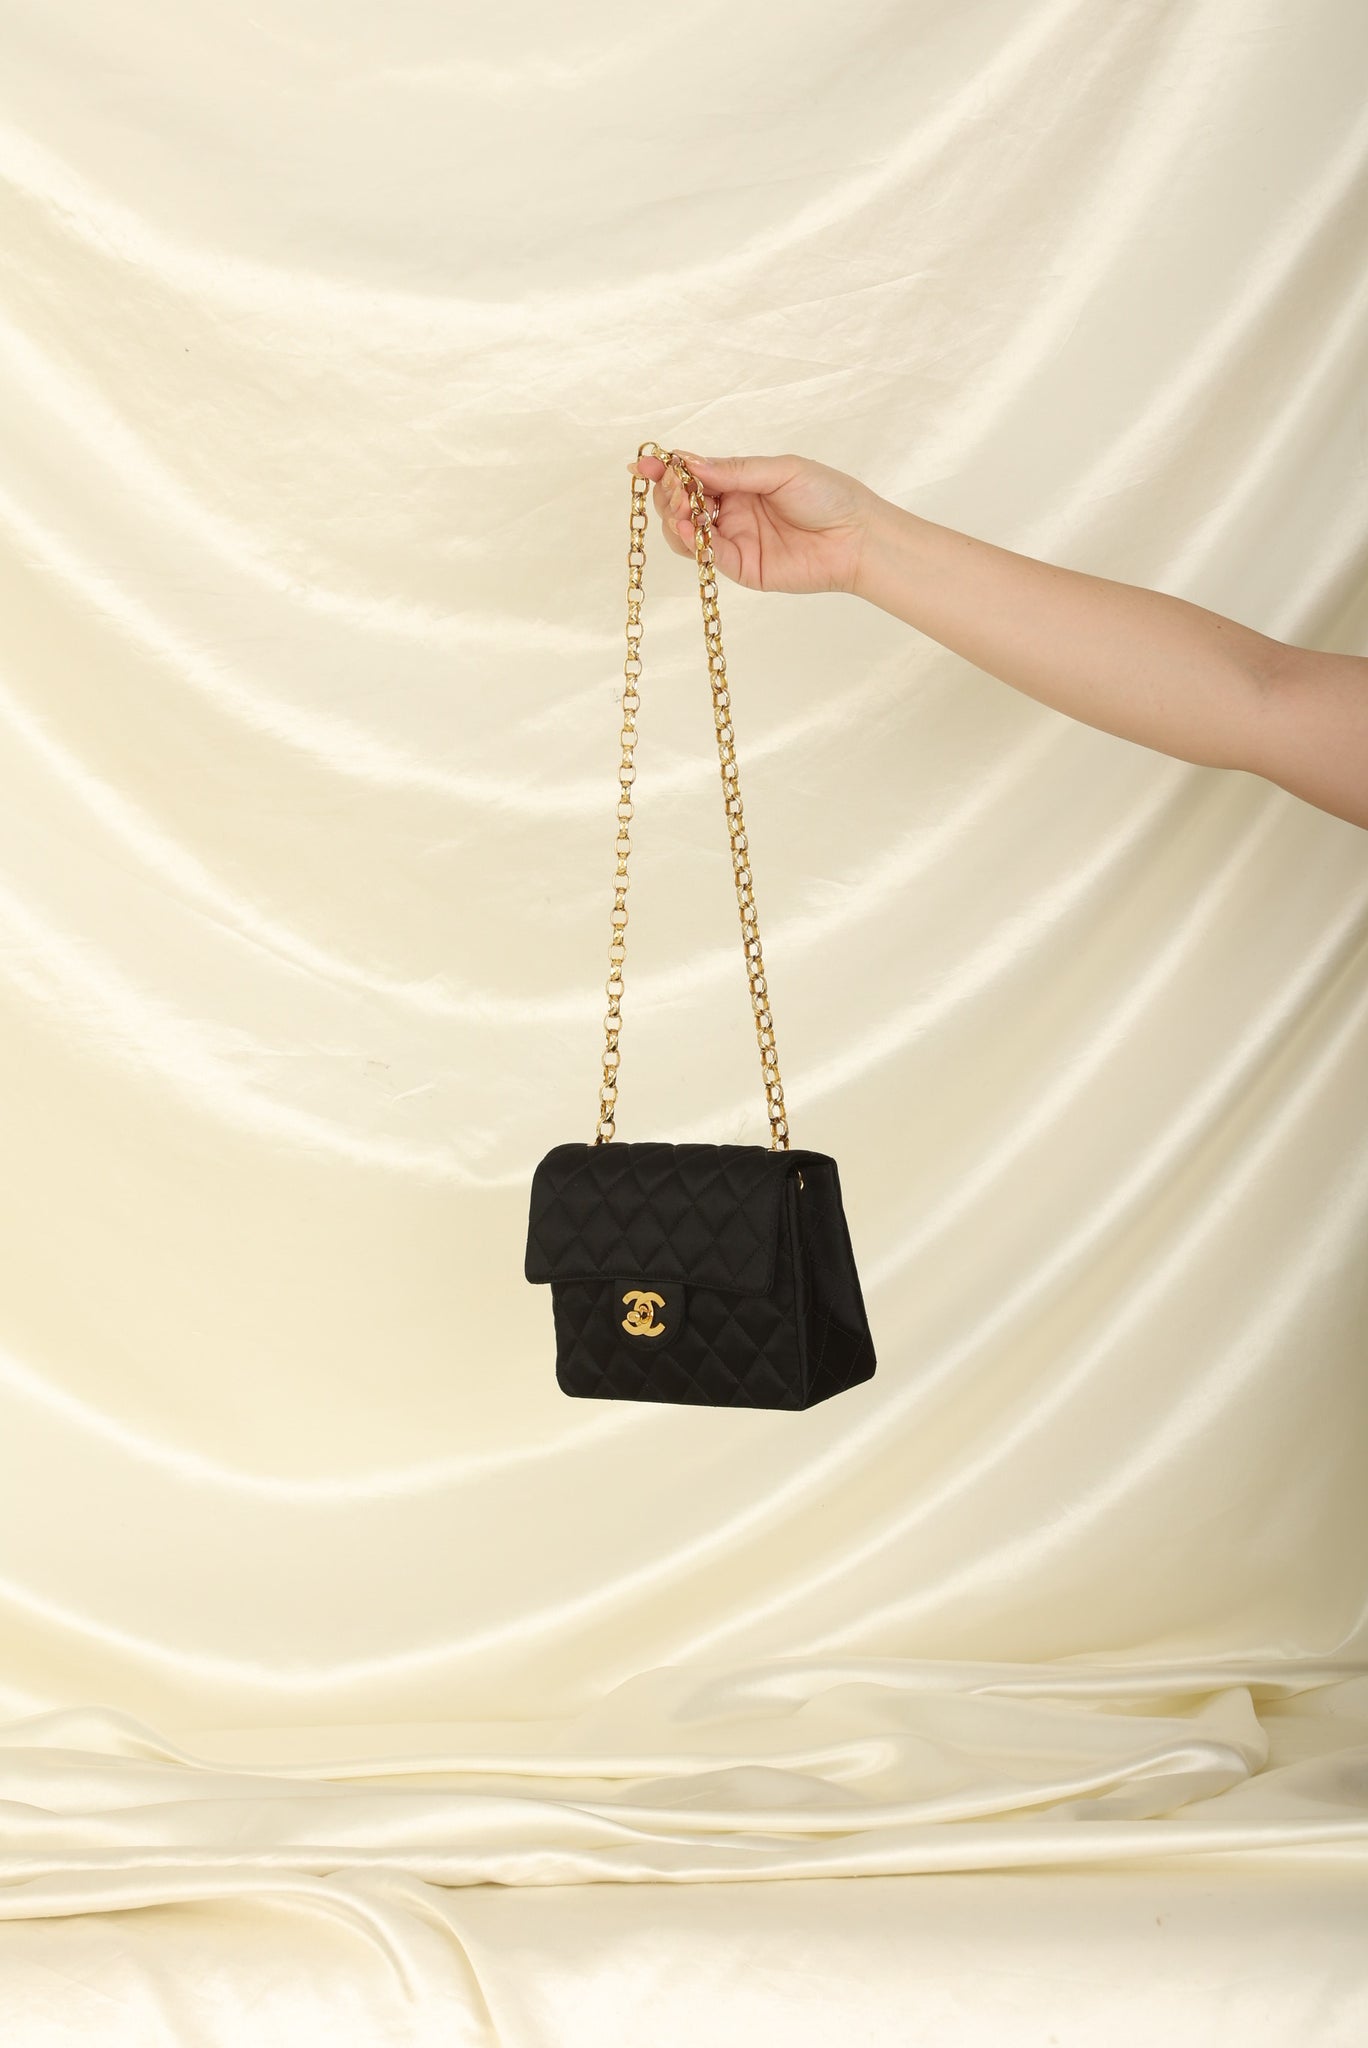 Chanel Black Classic Quilted Square Mini 2.55 Flap Bag 24k Gold